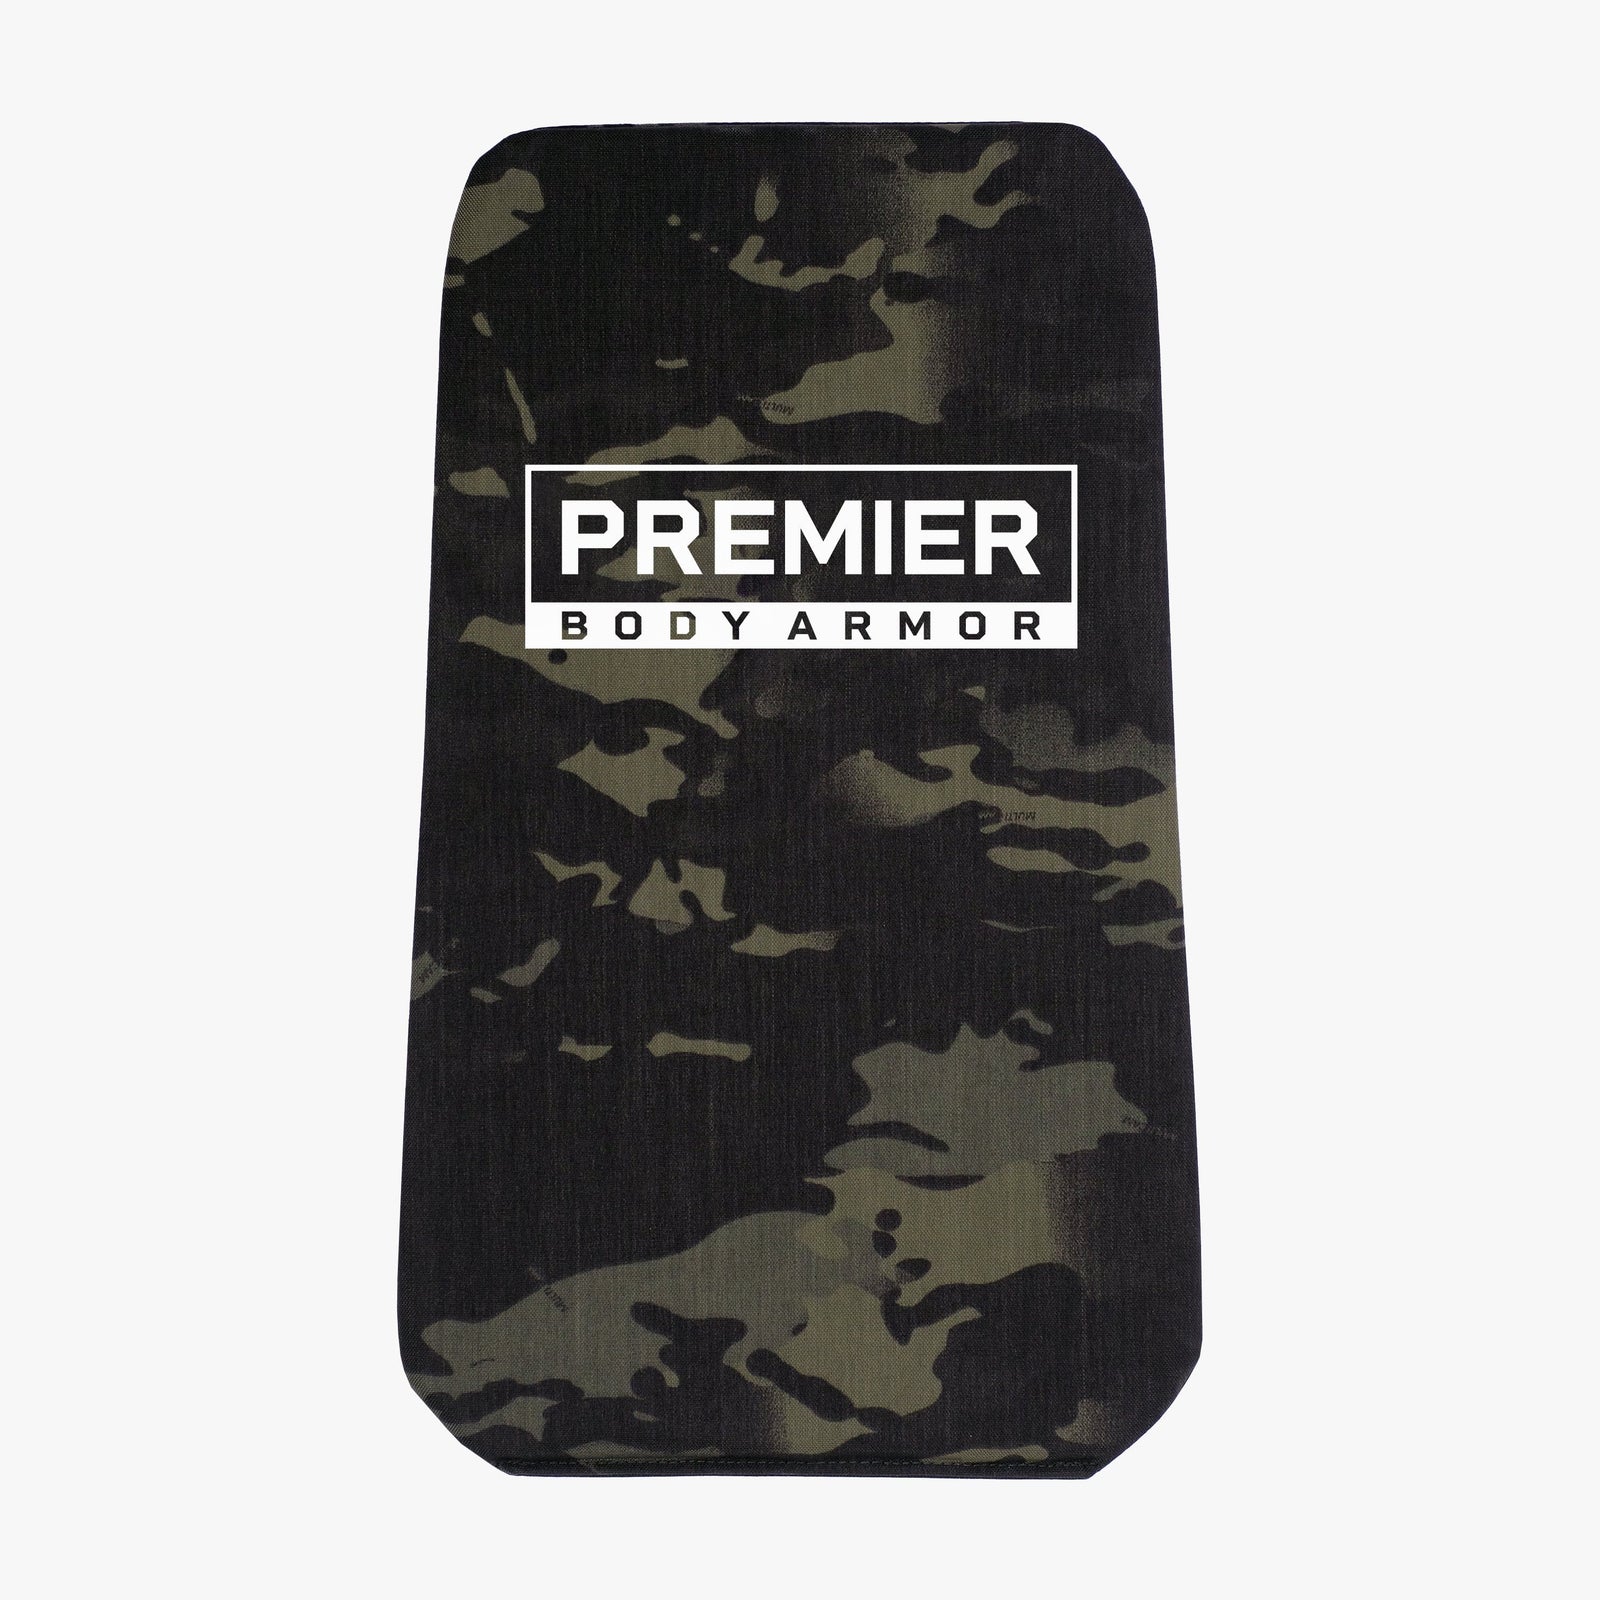 Premier Body Armor Stratis-max Level IV Plate Carriers STR-9267 ON SALE!